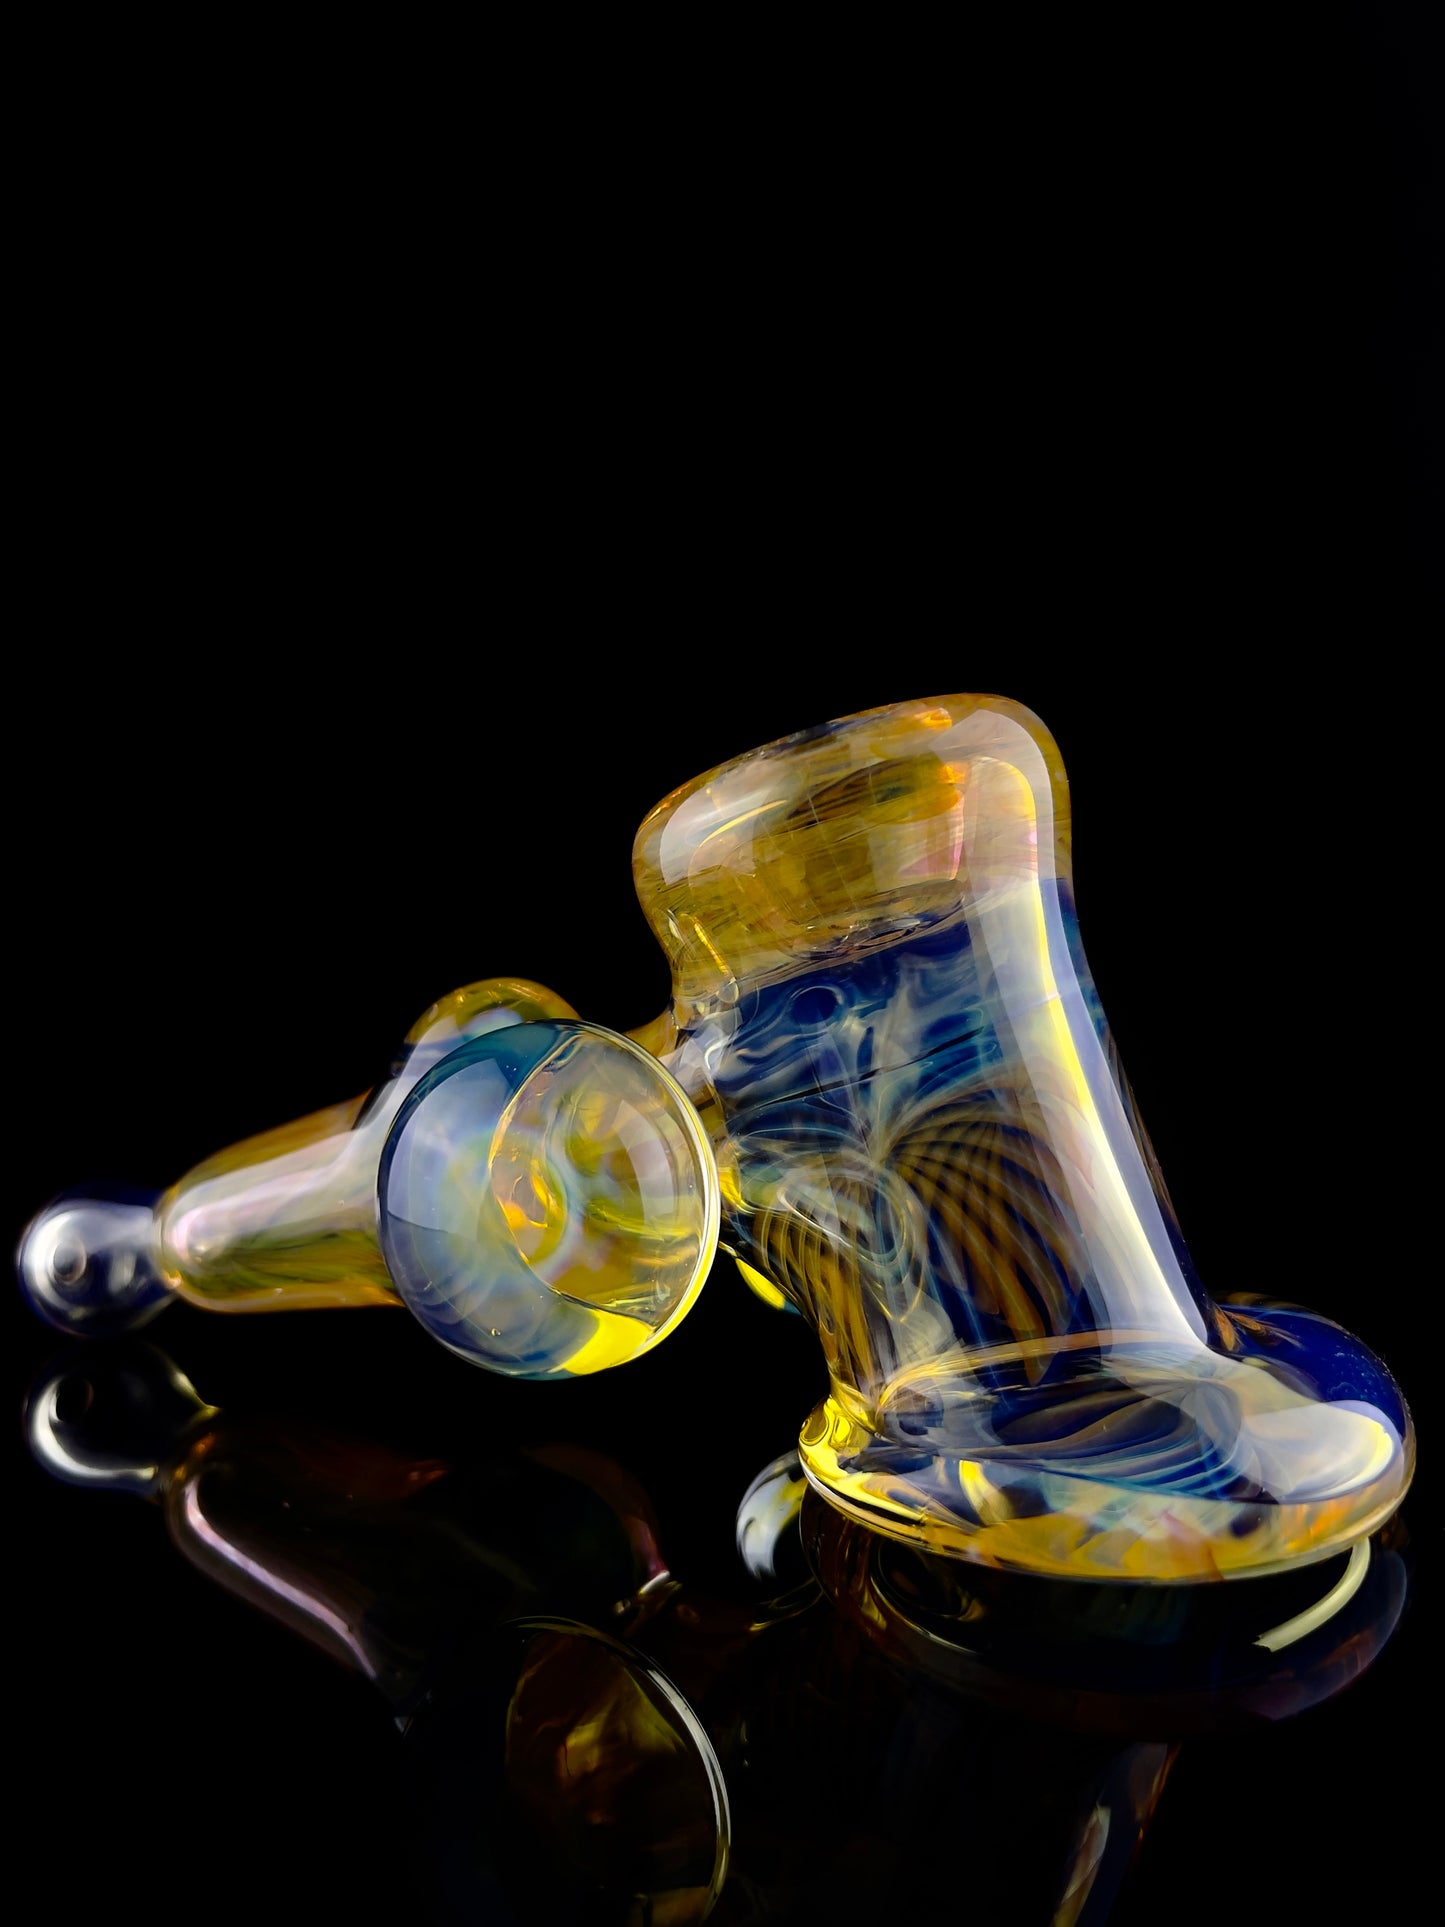 Maka B Hammer Fumed with Marble